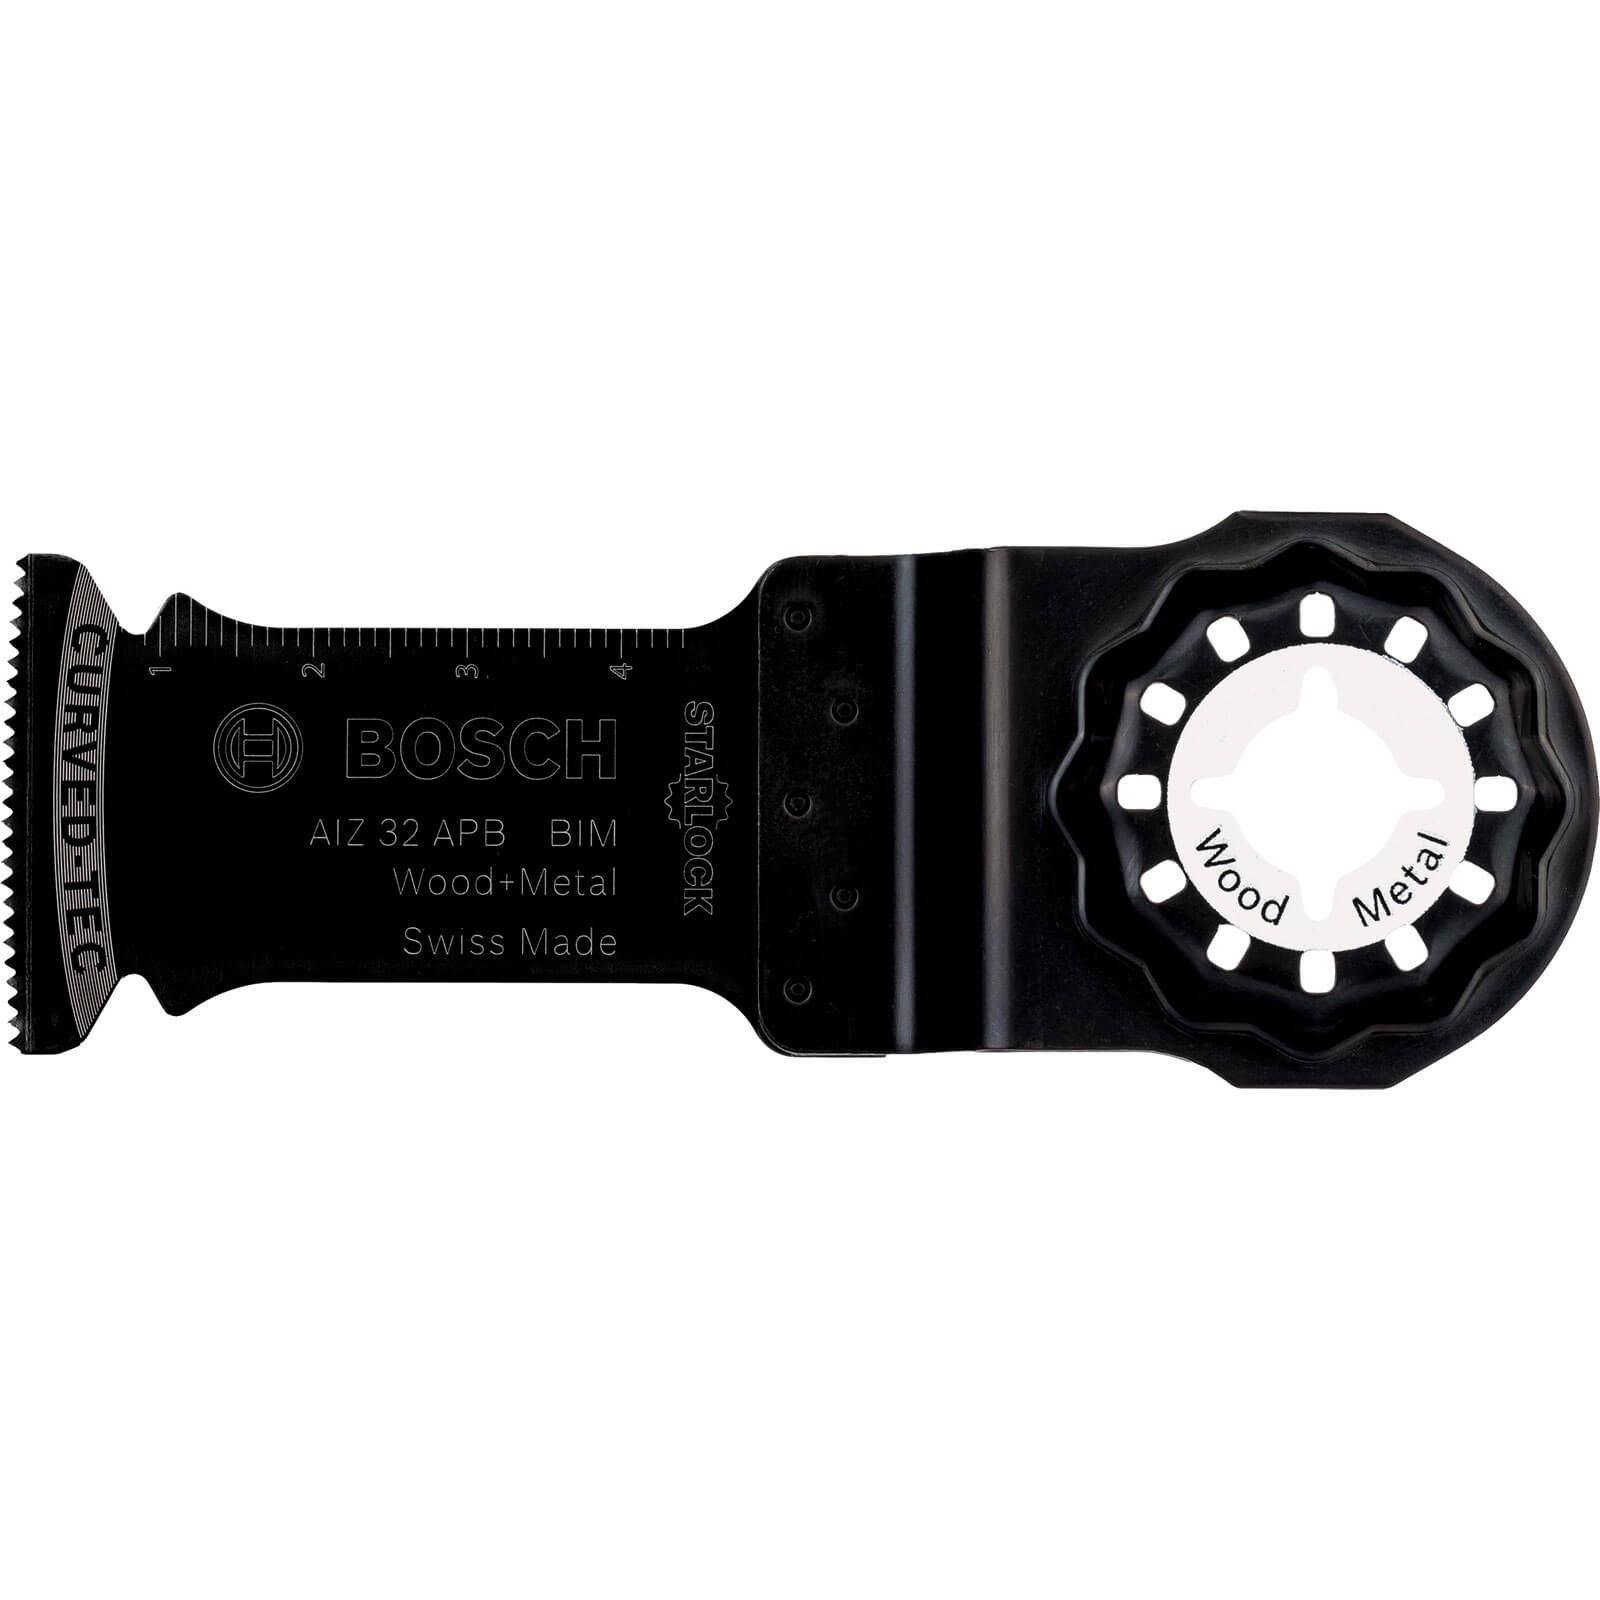 Image of Bosch AIZ 32 APB Metal and Wood Oscillating Multi Tool Plunge Saw Blade 32mm Pack of 5